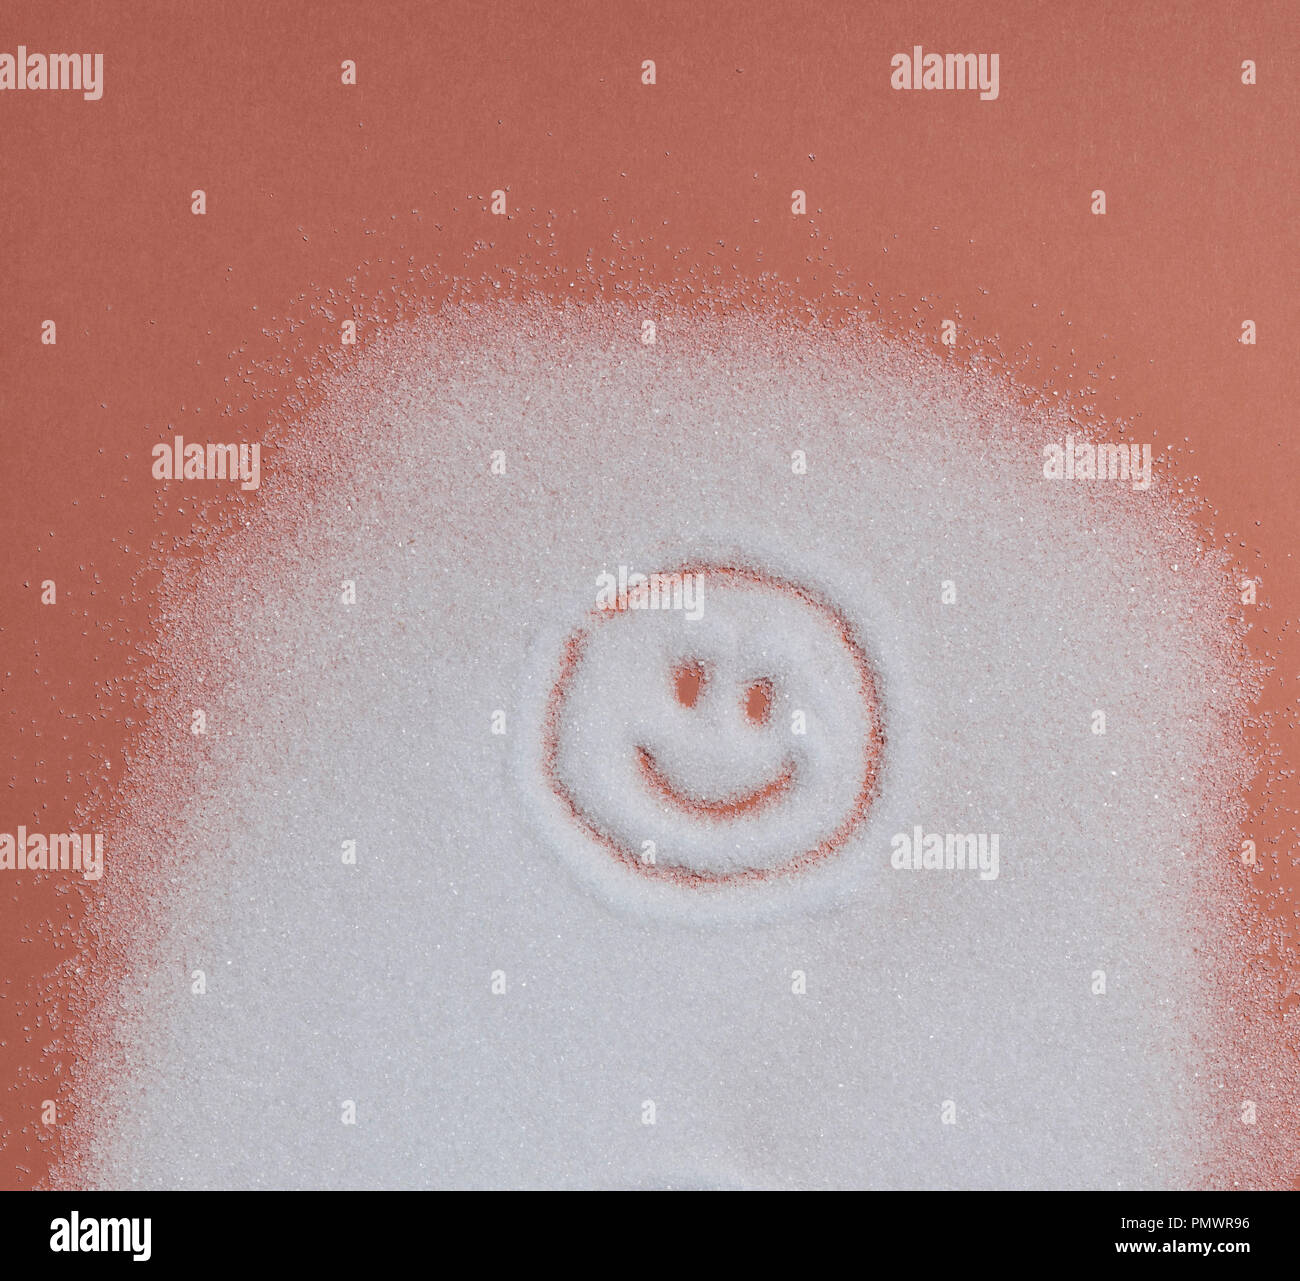 Smiley face in sugar on orange background Stock Photo